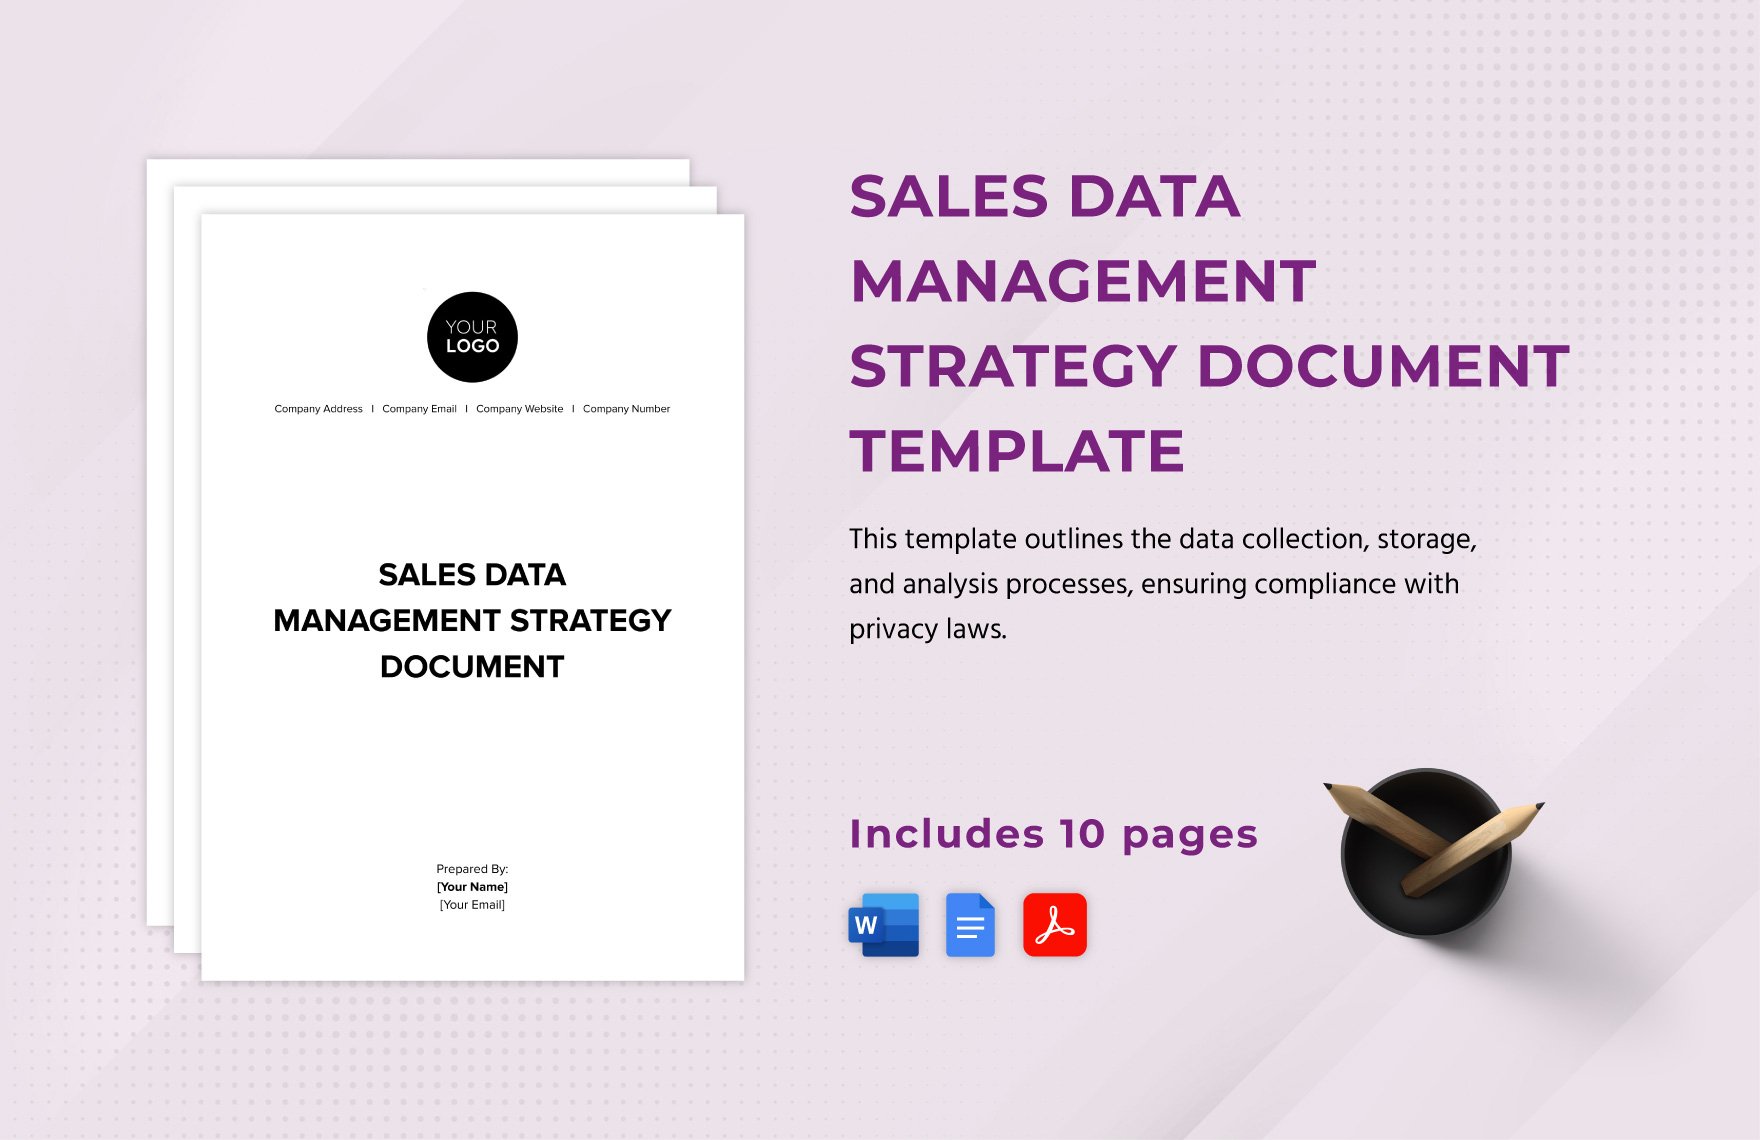 Sales Data Management Strategy Document Template in Word, Google Docs, PDF